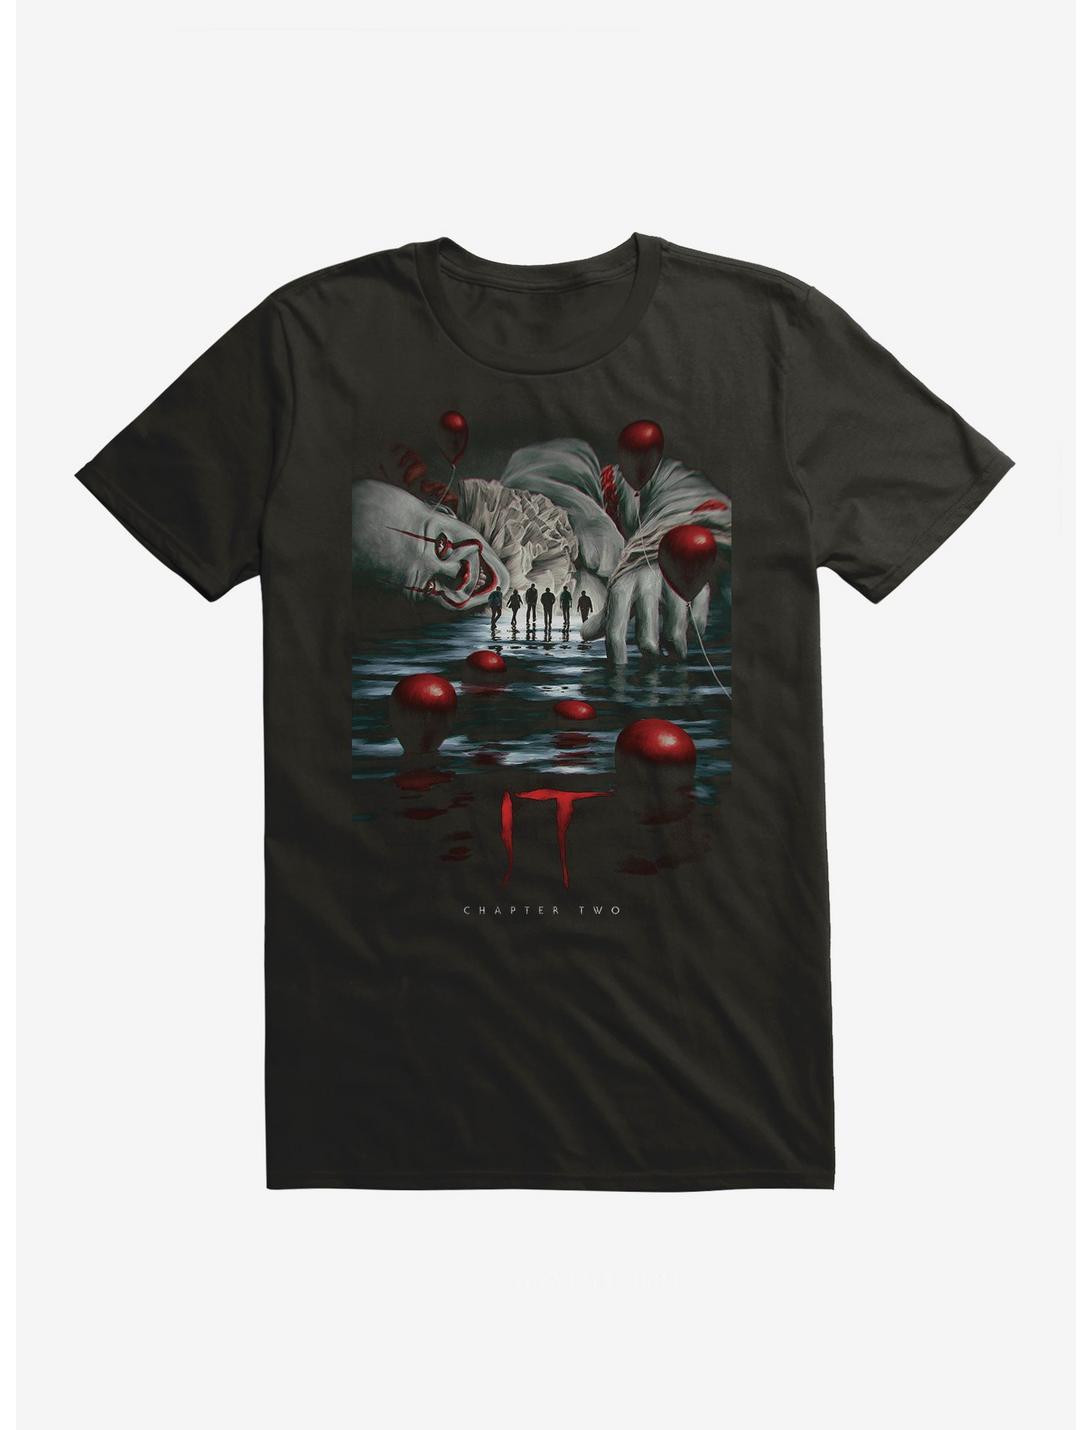 IT Chapter 2 Movie Poster T-Shirt, BLACK, hi-res